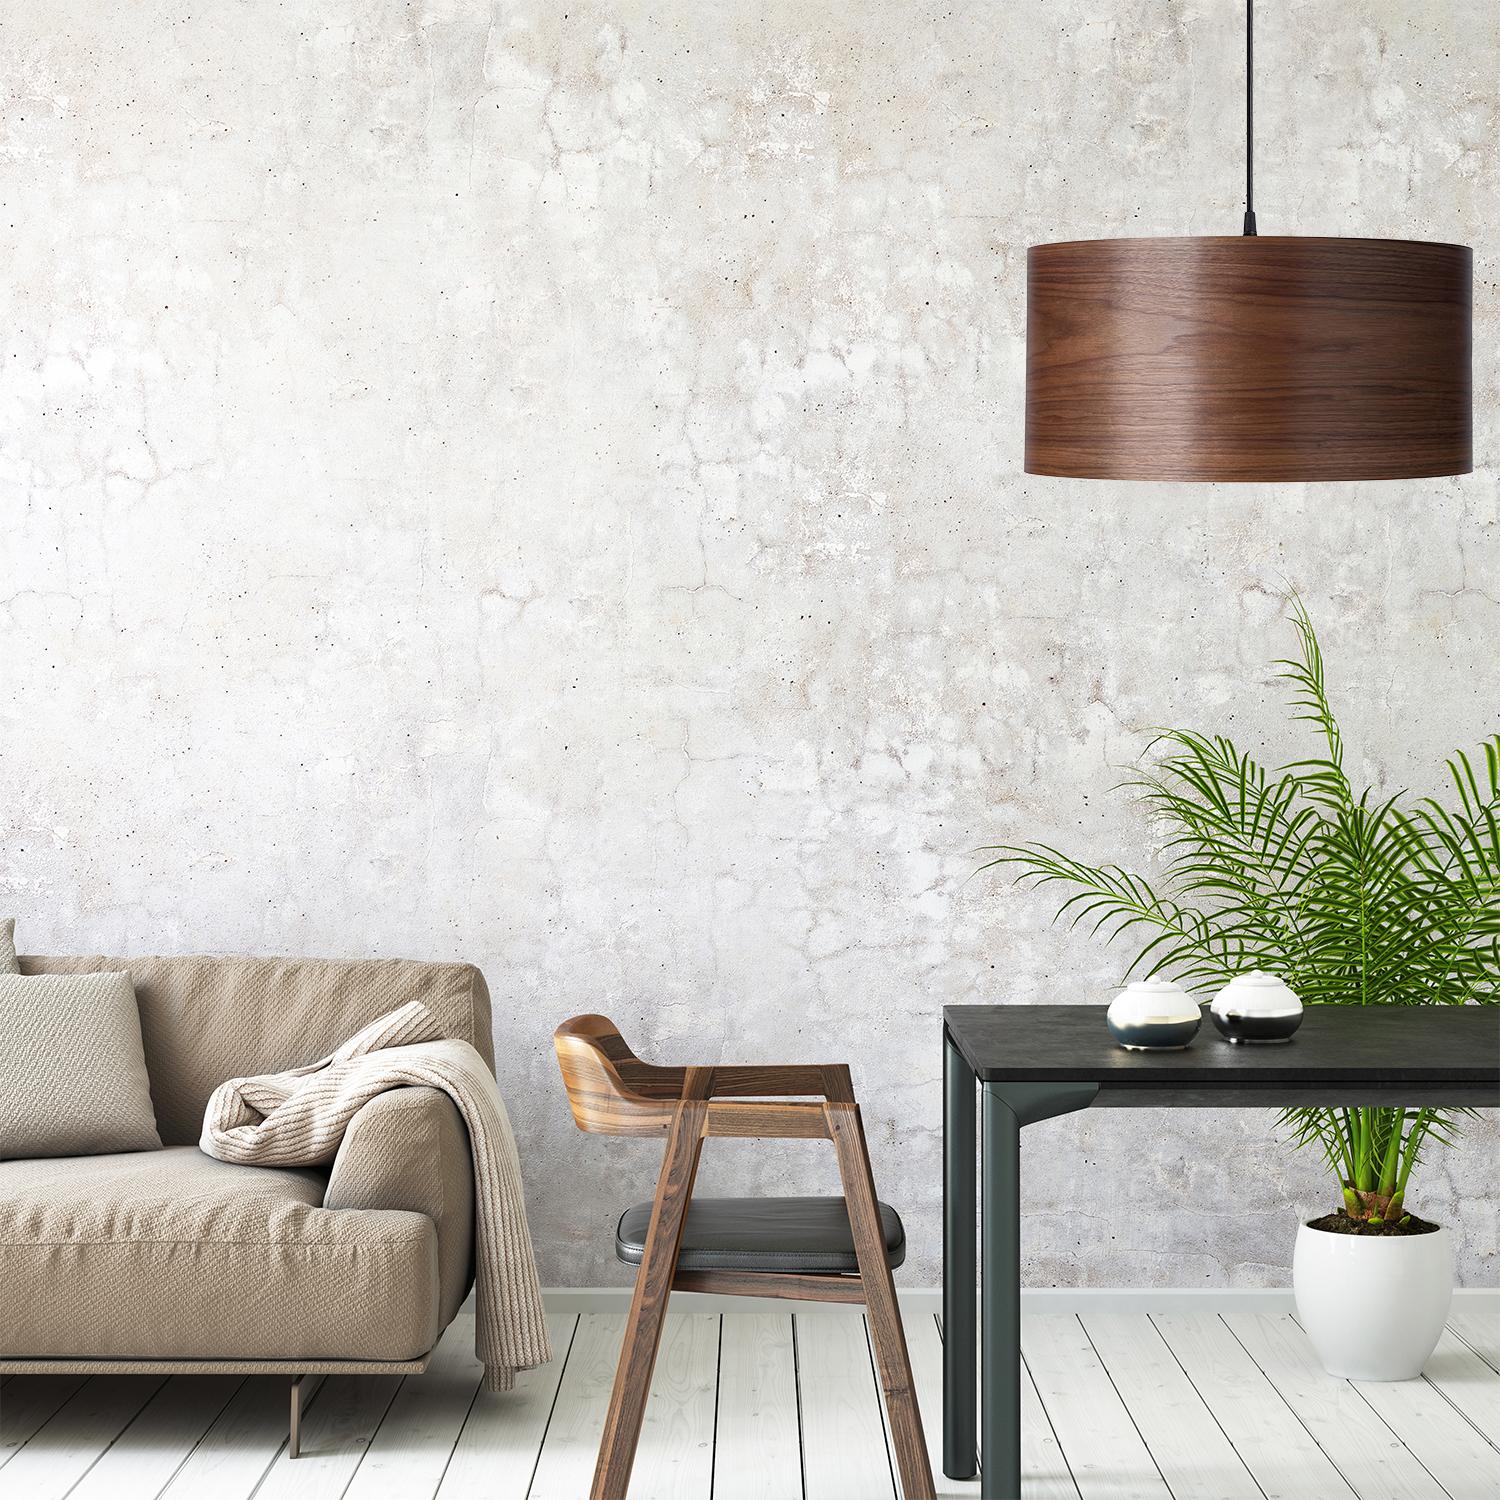 ARA is a contemporary, Mid-Century Modern light fixture. This is a minimalist luxury drum pendant design and can be exhibited in bedrooms, offices, dining nooks, and restaurants. Walnut is prized by designers for its glorious tight grain pattern. We